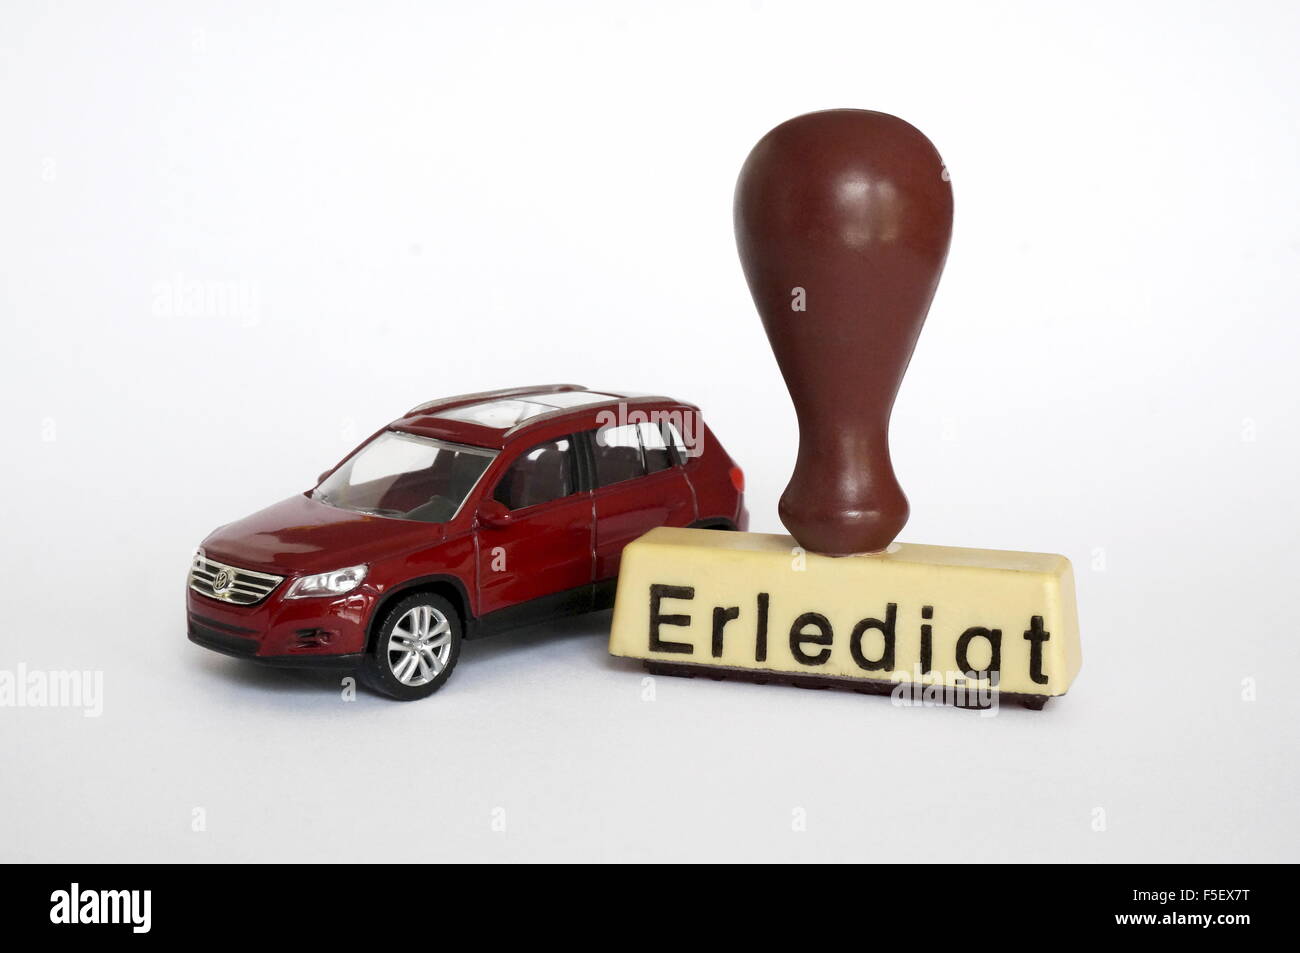 ILLUSTRATION - A Volkswagen car model 'VW Tiguan' next to a stamp with the inscription 'Done' on it. The photo was taken on 15 October 2015. Photo: S. Steinach - NO WIRE SERVICE - Stock Photo